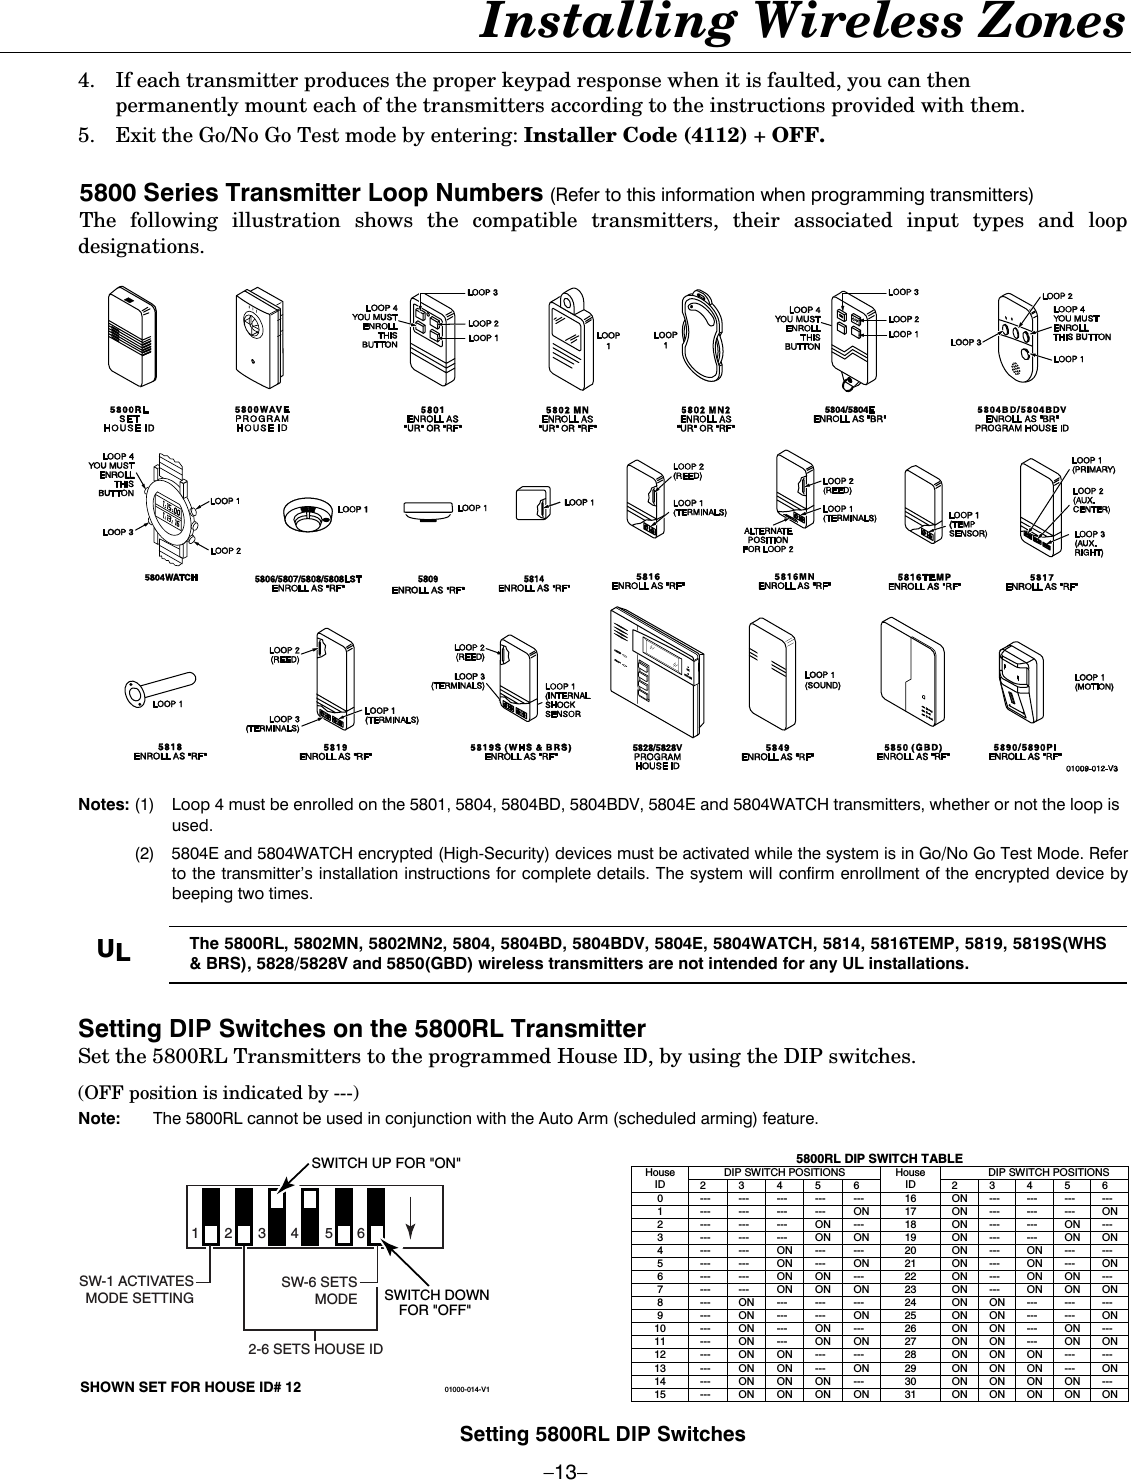  –13– Installing Wireless Zones  4.  If each transmitter produces the proper keypad response when it is faulted, you can then permanently mount each of the transmitters according to the instructions provided with them. 5.  Exit the Go/No Go Test mode by entering: Installer Code (4112) + OFF.  5800 Series Transmitter Loop Numbers (Refer to this information when programming transmitters) The following illustration shows the compatible transmitters, their associated input types and loop designations.    Notes: (1)  Loop 4 must be enrolled on the 5801, 5804, 5804BD, 5804BDV, 5804E and 5804WATCH transmitters, whether or not the loop is used.   (2)  5804E and 5804WATCH encrypted (High-Security) devices must be activated while the system is in Go/No Go Test Mode. Refer to the transmitter’s installation instructions for complete details. The system will confirm enrollment of the encrypted device by beeping two times.  UL The 5800RL, 5802MN, 5802MN2, 5804, 5804BD, 5804BDV, 5804E, 5804WATCH, 5814, 5816TEMP, 5819, 5819S(WHS &amp; BRS), 5828/5828V and 5850(GBD) wireless transmitters are not intended for any UL installations.   Setting DIP Switches on the 5800RL Transmitter  Set the 5800RL Transmitters to the programmed House ID, by using the DIP switches.  (OFF position is indicated by ---)  Note:  The 5800RL cannot be used in conjunction with the Auto Arm (scheduled arming) feature.   01000-014-V1234561SW-6 SETSMODE2-6 SETS HOUSE IDSW-1 ACTIVATESMODE SETTINGSWITCH DOWNFOR &quot;OFF&quot; SHOWN SET FOR HOUSE ID# 12SWITCH UP FOR &quot;ON&quot;  5800RL DIP SWITCH TABLE DIP SWITCH POSITIONS  DIP SWITCH POSITIONS House ID  2 3 4 5 6 House ID  2 3 4 5 6 0  --- --- --- --- ---  16  ON --- --- --- --- 1  --- --- --- --- ON  17  ON --- --- --- ON 2  --- --- --- ON ---  18  ON --- --- ON --- 3  --- --- --- ON ON  19  ON --- --- ON ON 4  --- --- ON --- ---  20  ON --- ON --- --- 5  --- --- ON --- ON  21  ON --- ON --- ON 6  ---  ---  ON ON  ---  22  ON ---  ON ON --- 7  --- --- ON ON ON 23 ON --- ON ON ON 8  --- ON --- --- ---  24  ON ON --- --- --- 9  --- ON --- --- ON  25  ON ON --- --- ON 10  ---  ON ---  ON ---  26  ON ON ---  ON --- 11  ---  ON ---  ON ON  27  ON ON ---  ON ON 12  ---  ON ON ---  ---  28  ON ON ON ---  --- 13  ---  ON ON ---  ON  29  ON ON ON ---  ON 14  ---  ON ON ON  ---  30  ON ON ON ON --- 15  ---  ON ON ON  ON  31  ON ON ON ON ON   Setting 5800RL DIP Switches 